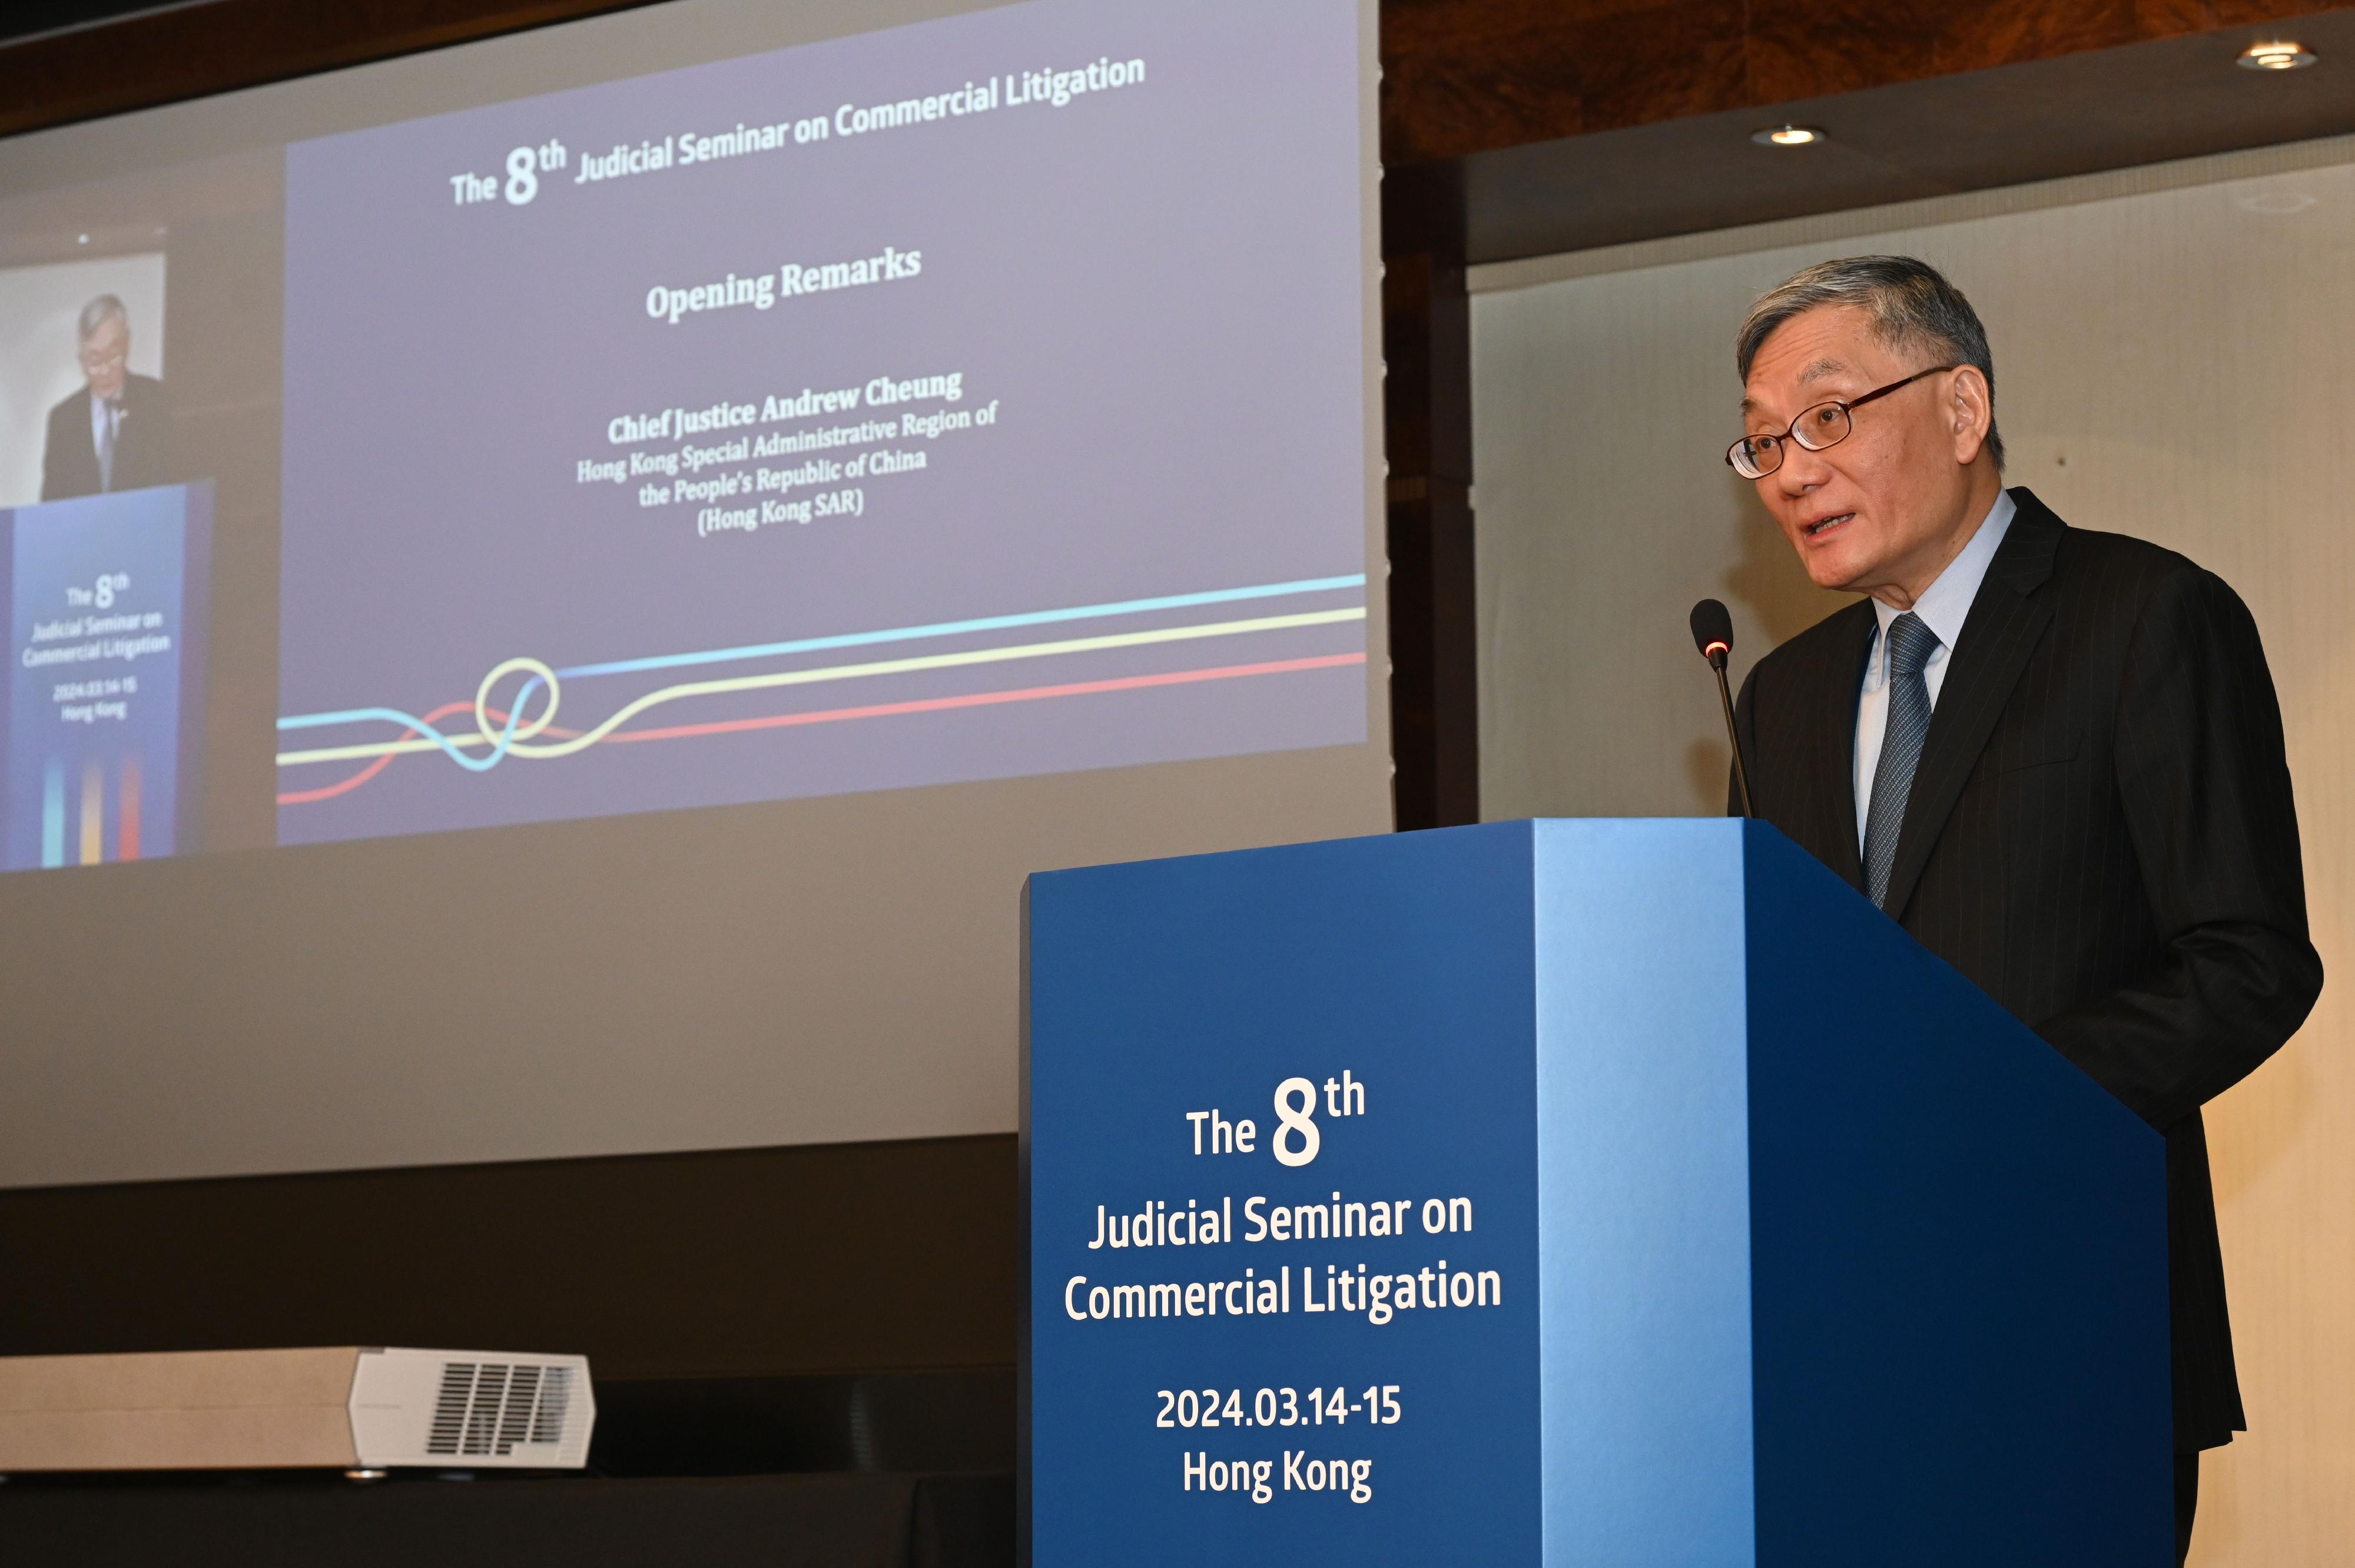 Chief Justice Andrew Cheung Kui-nung, Chief Justice of the Court of Final Appeal of the Hong Kong Special Administrative Region, delivers an opening address at the eighth Judicial Seminar on Commercial Litigation today (March 14).